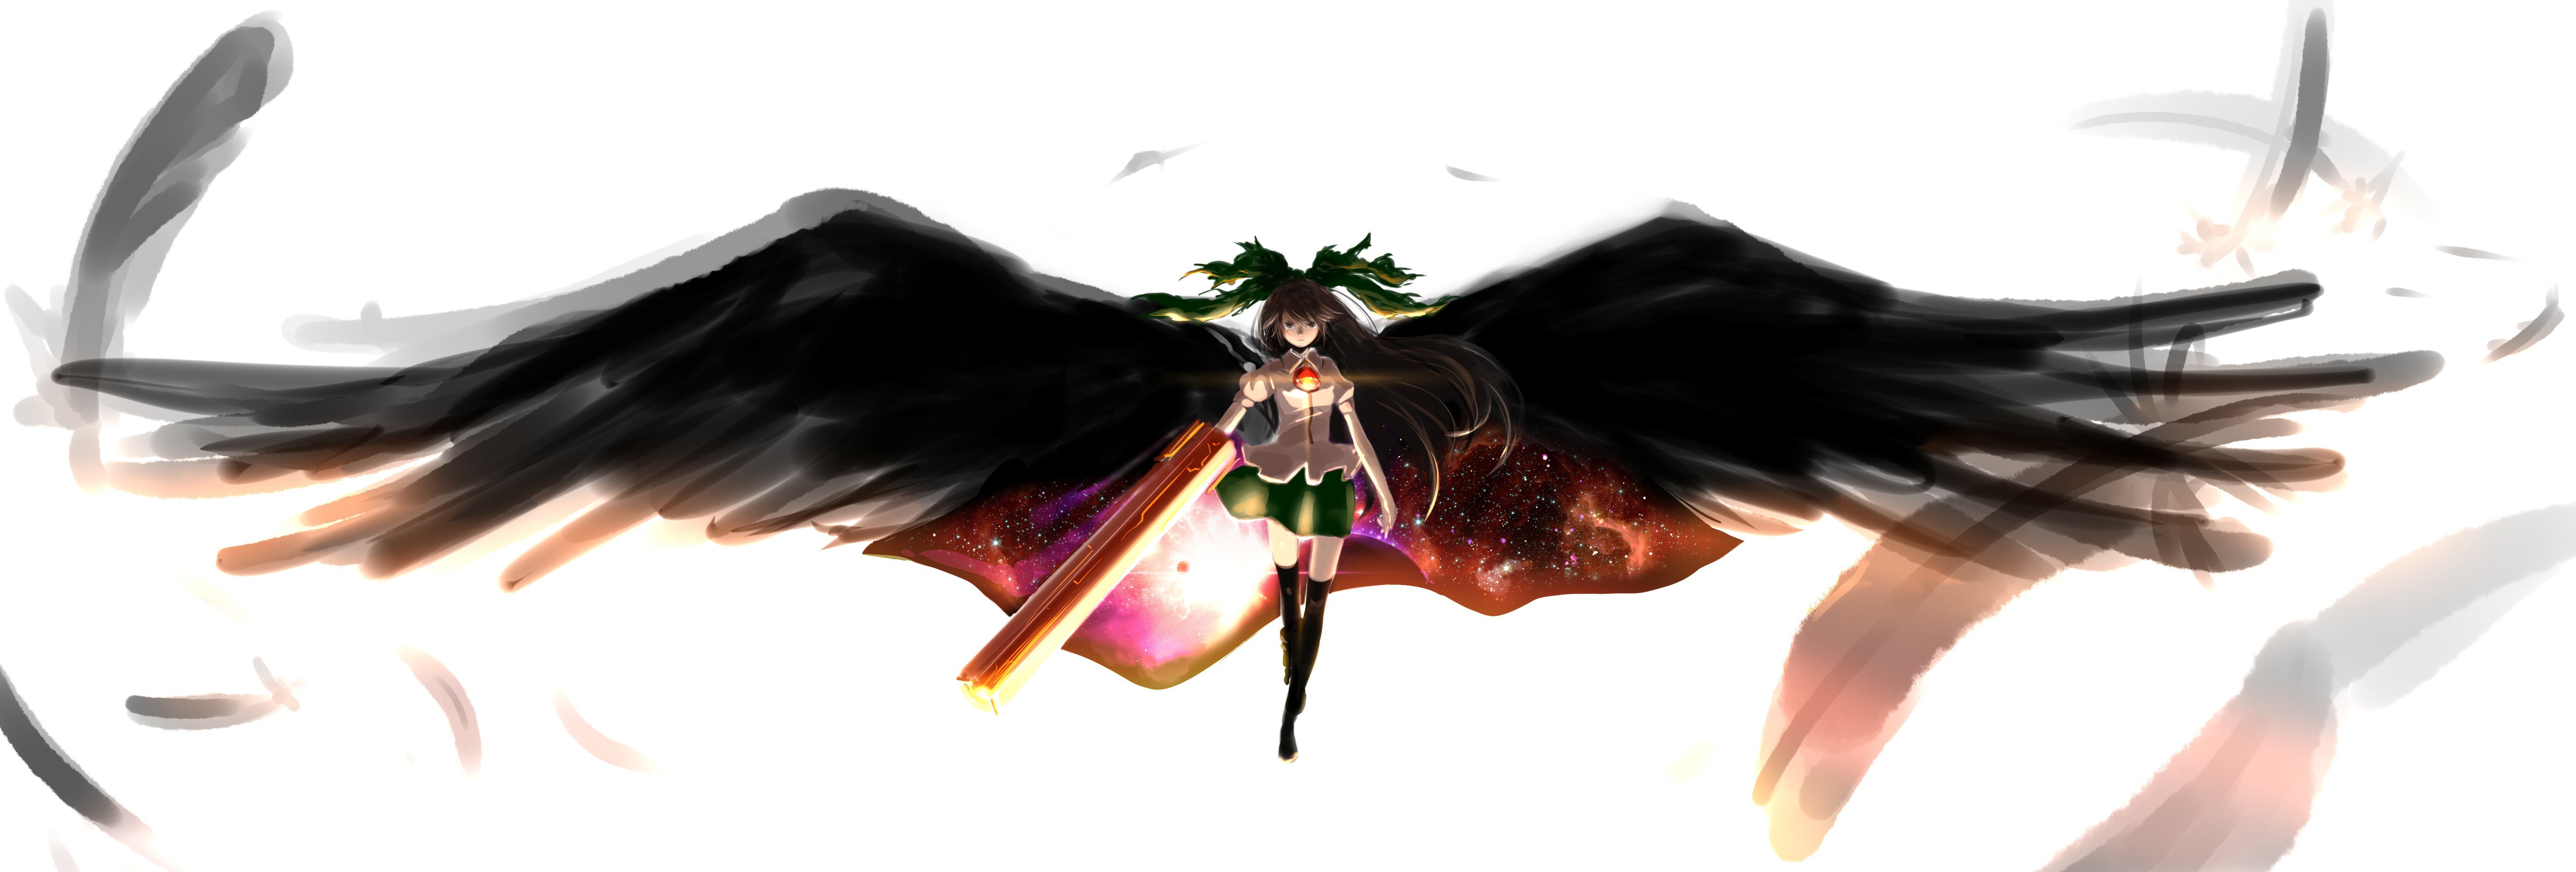 brunettes, Video, Games, Touhou, Wings, Outer, Space, Stars, Skirts, Long, Hair, Weapons, Brown, Eyes, Feathers, Thigh, Highs, Cannons, Bows, Capes, Reiuji, Utsuho, Simple, Background, Anime, Girls, Third, Eye Wallpaper